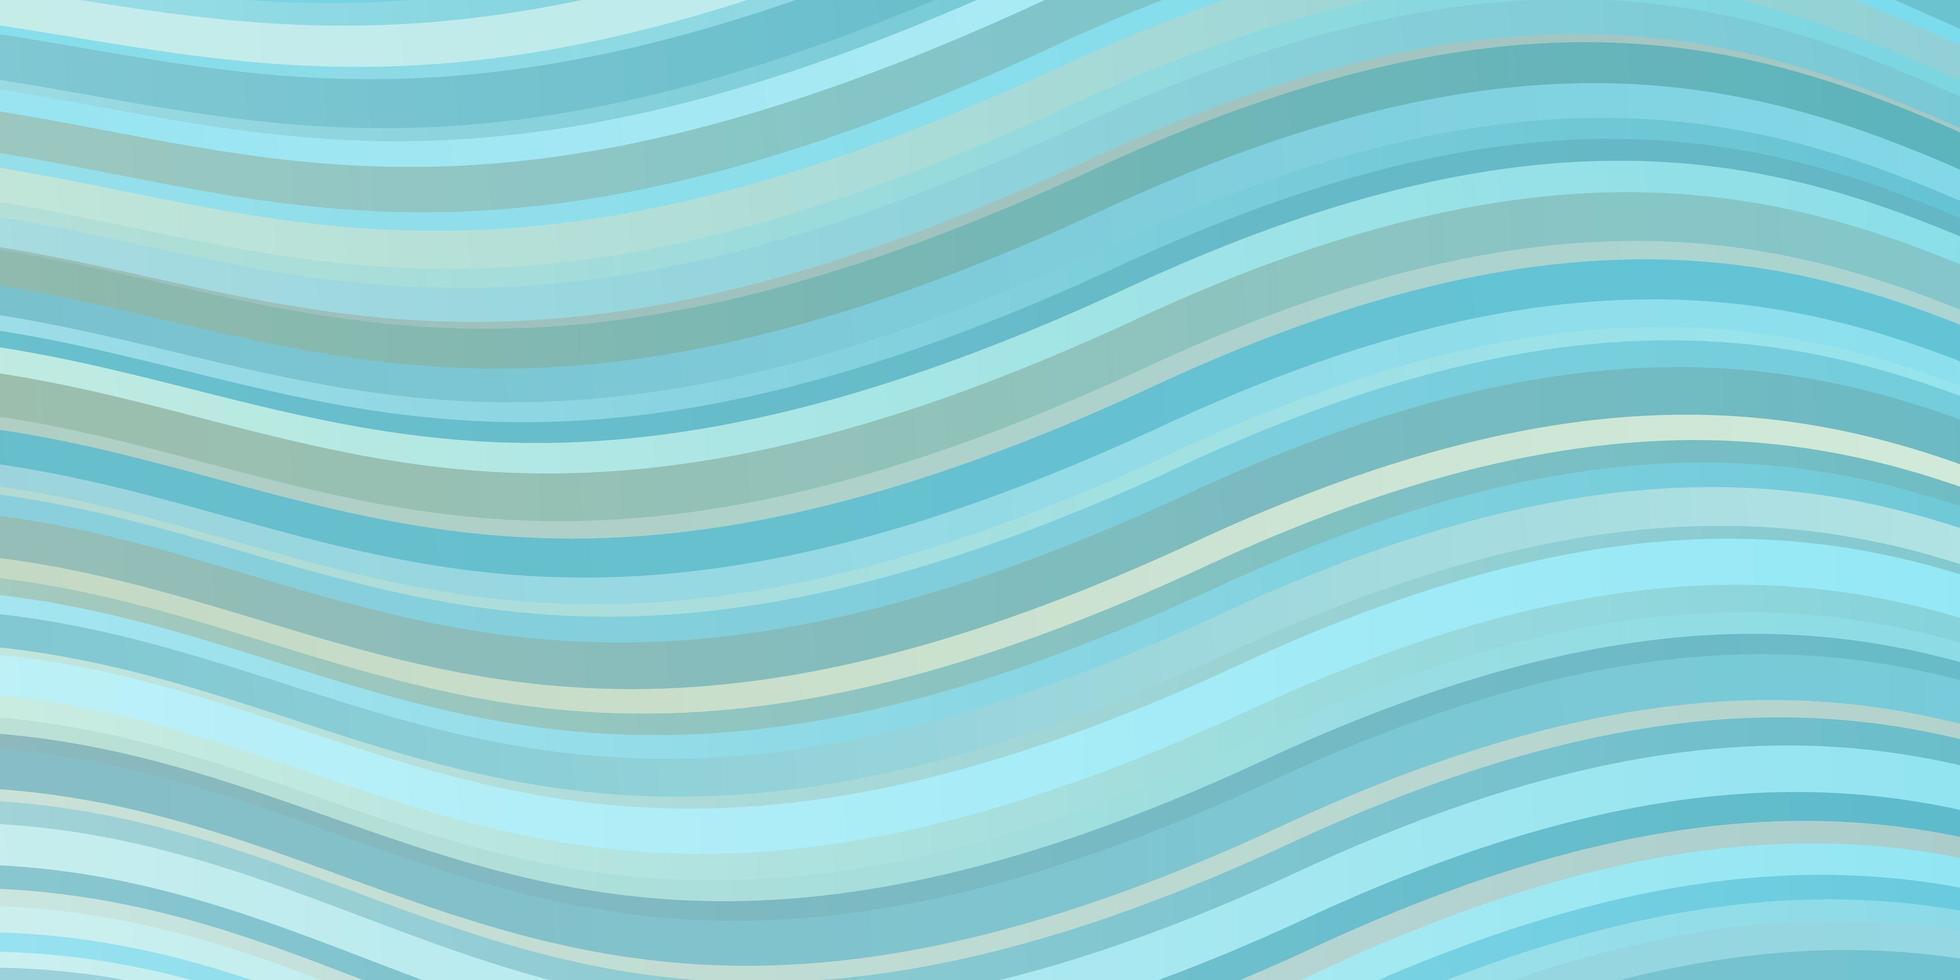 Light BLUE vector background with curves